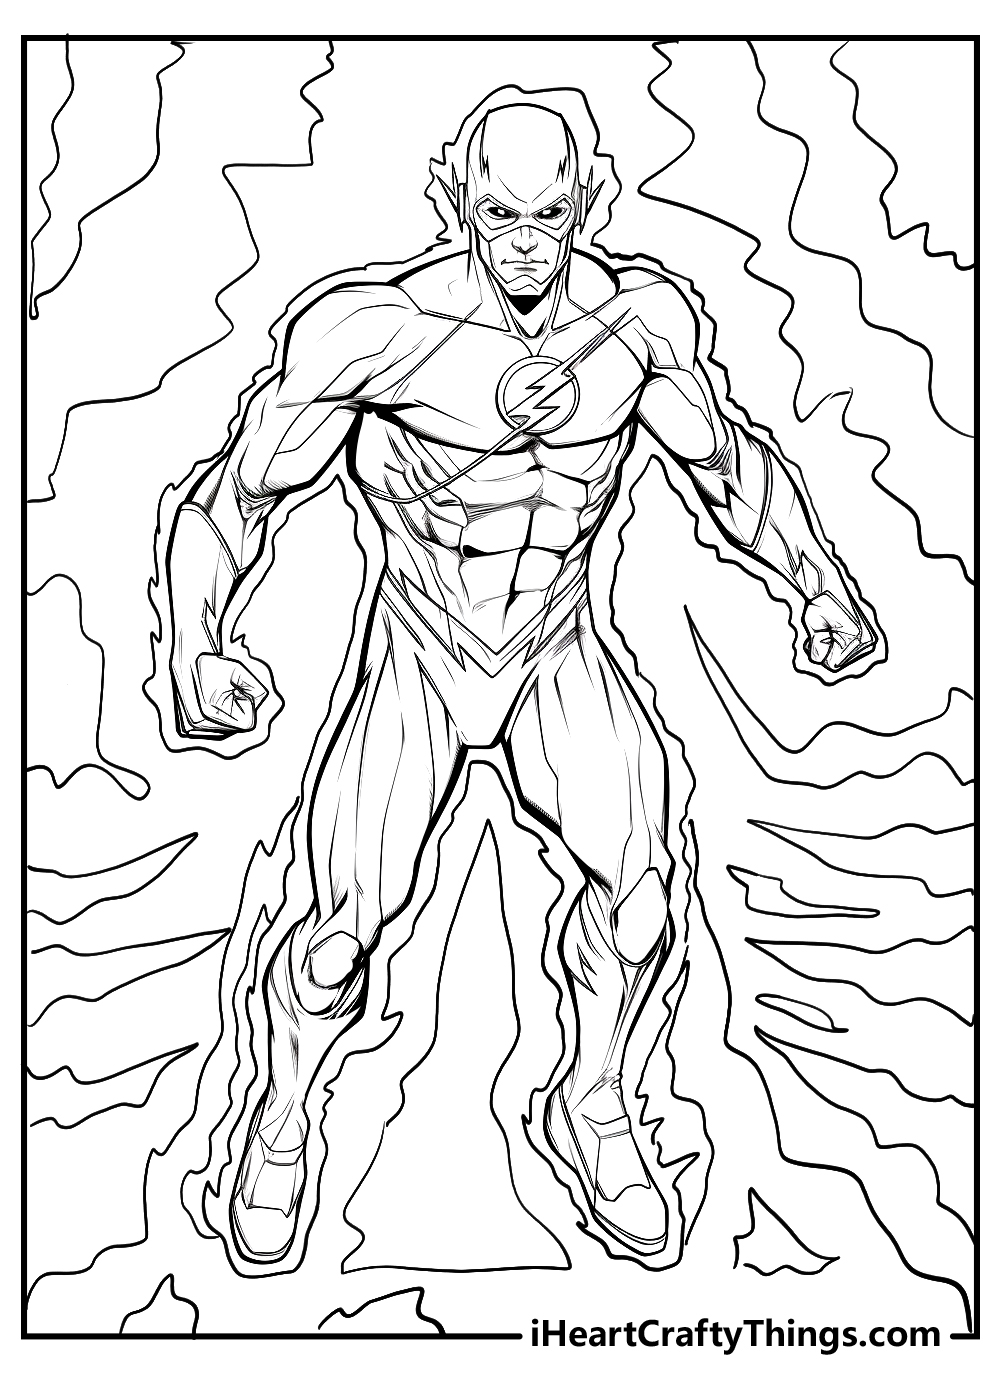 Printable the flash coloring pages updated